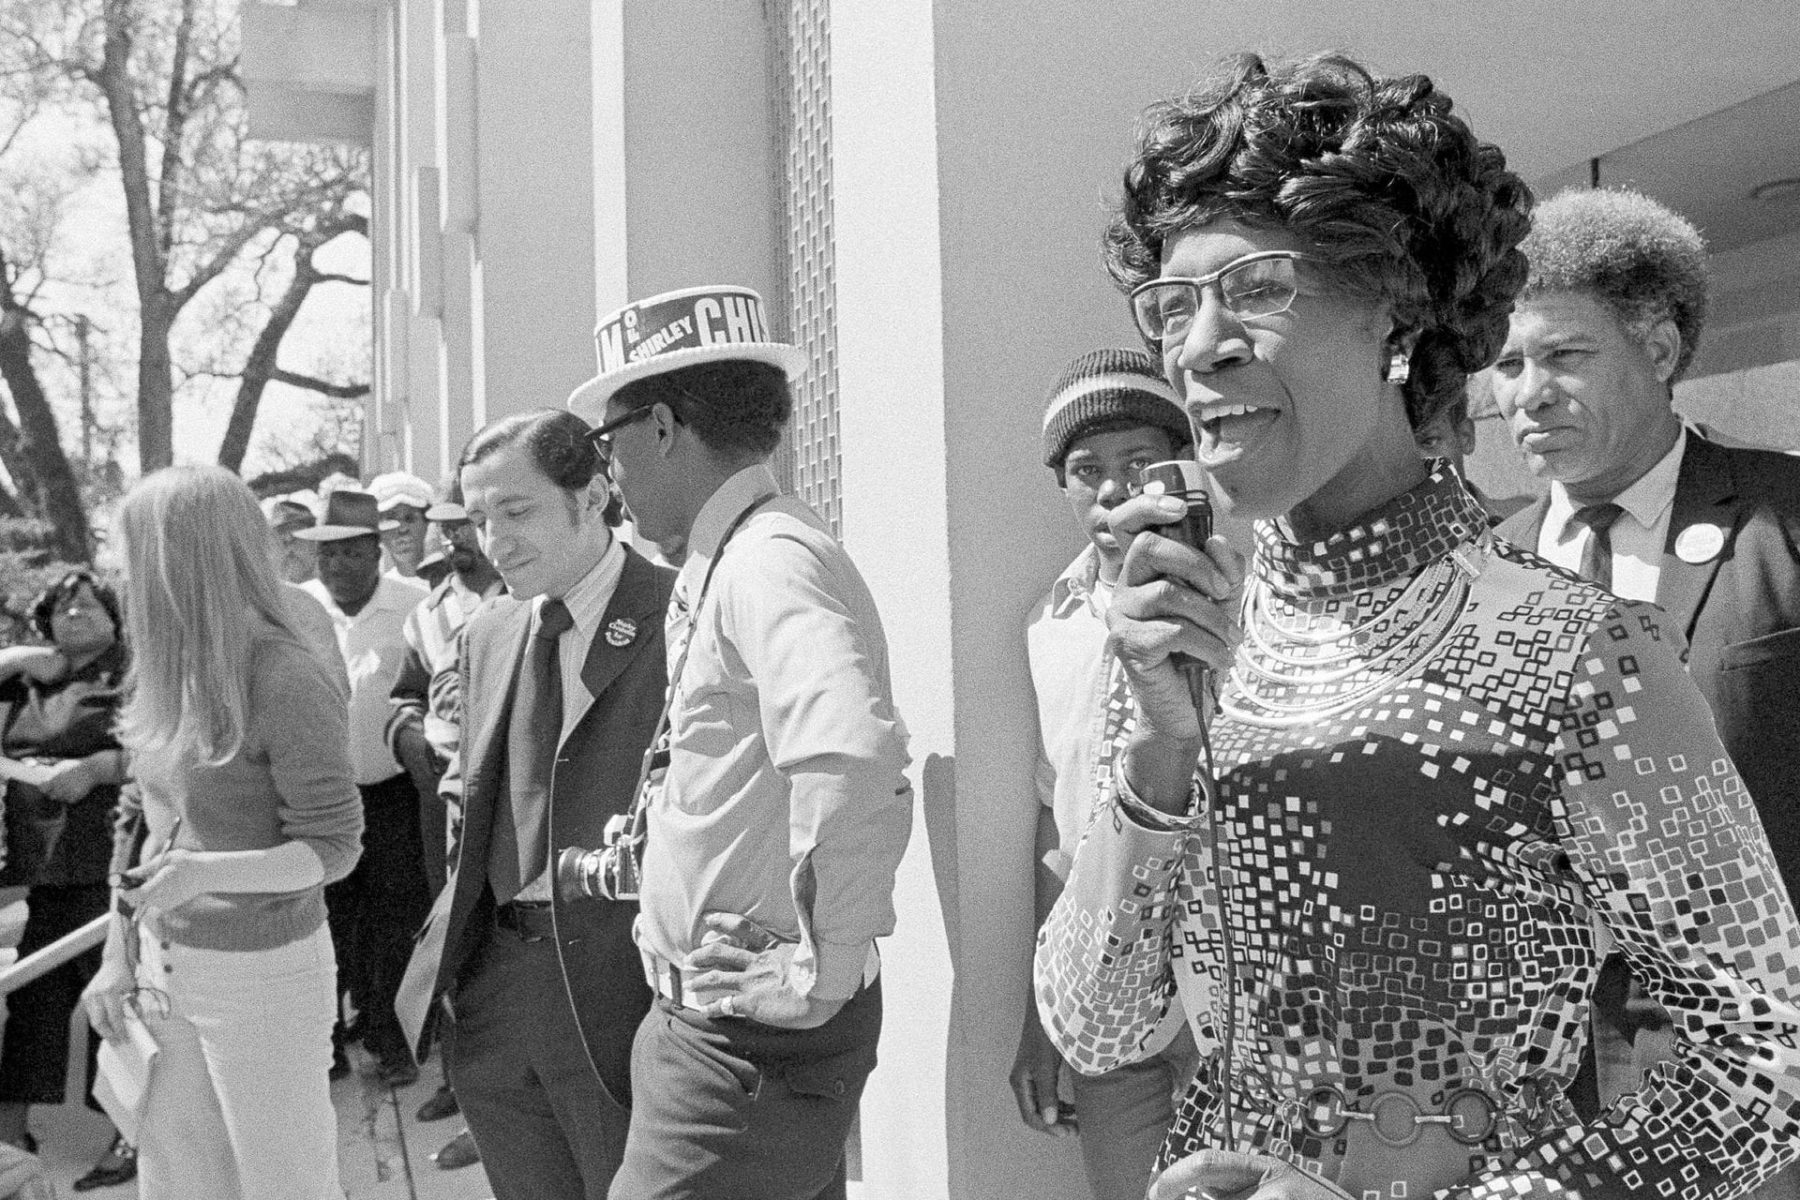 Shirley Chisholm speaks at a campaign rally.